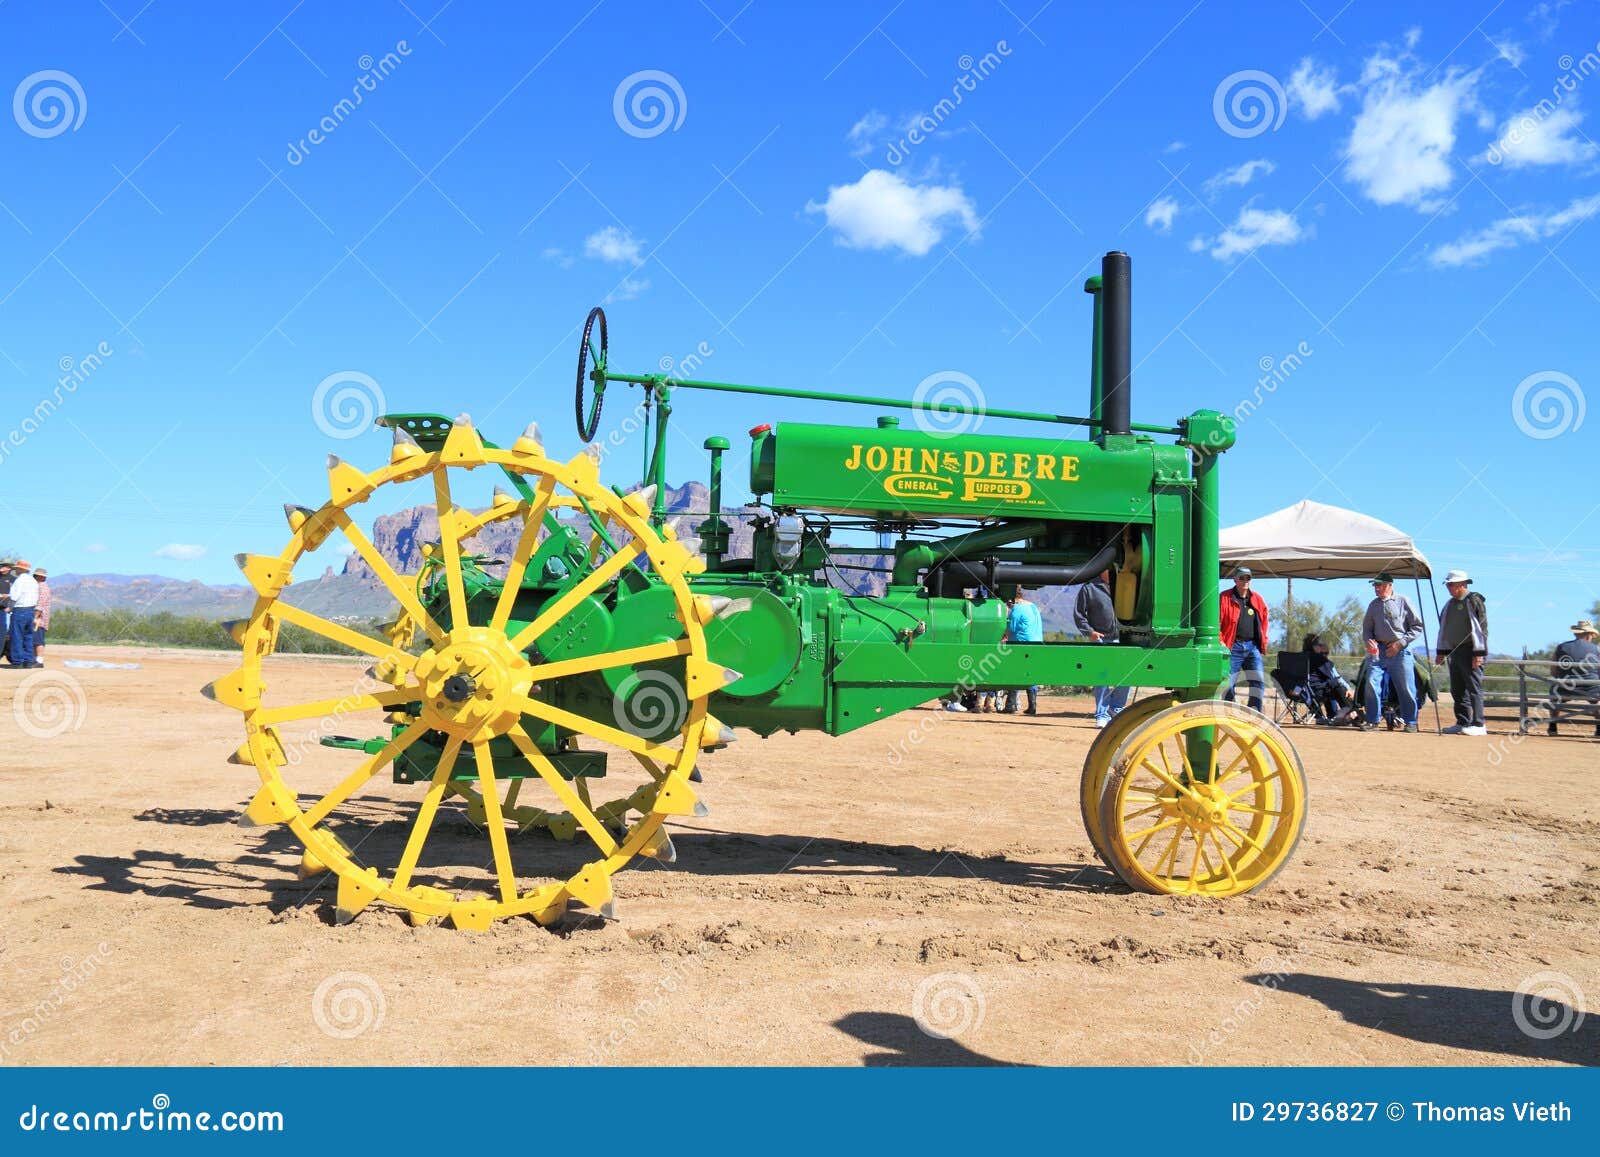  - john-deere-tractor-was-exhibition-apache-junction-arizona-usa-arizona-early-day-gas-engine-tractor-association-march-29736827